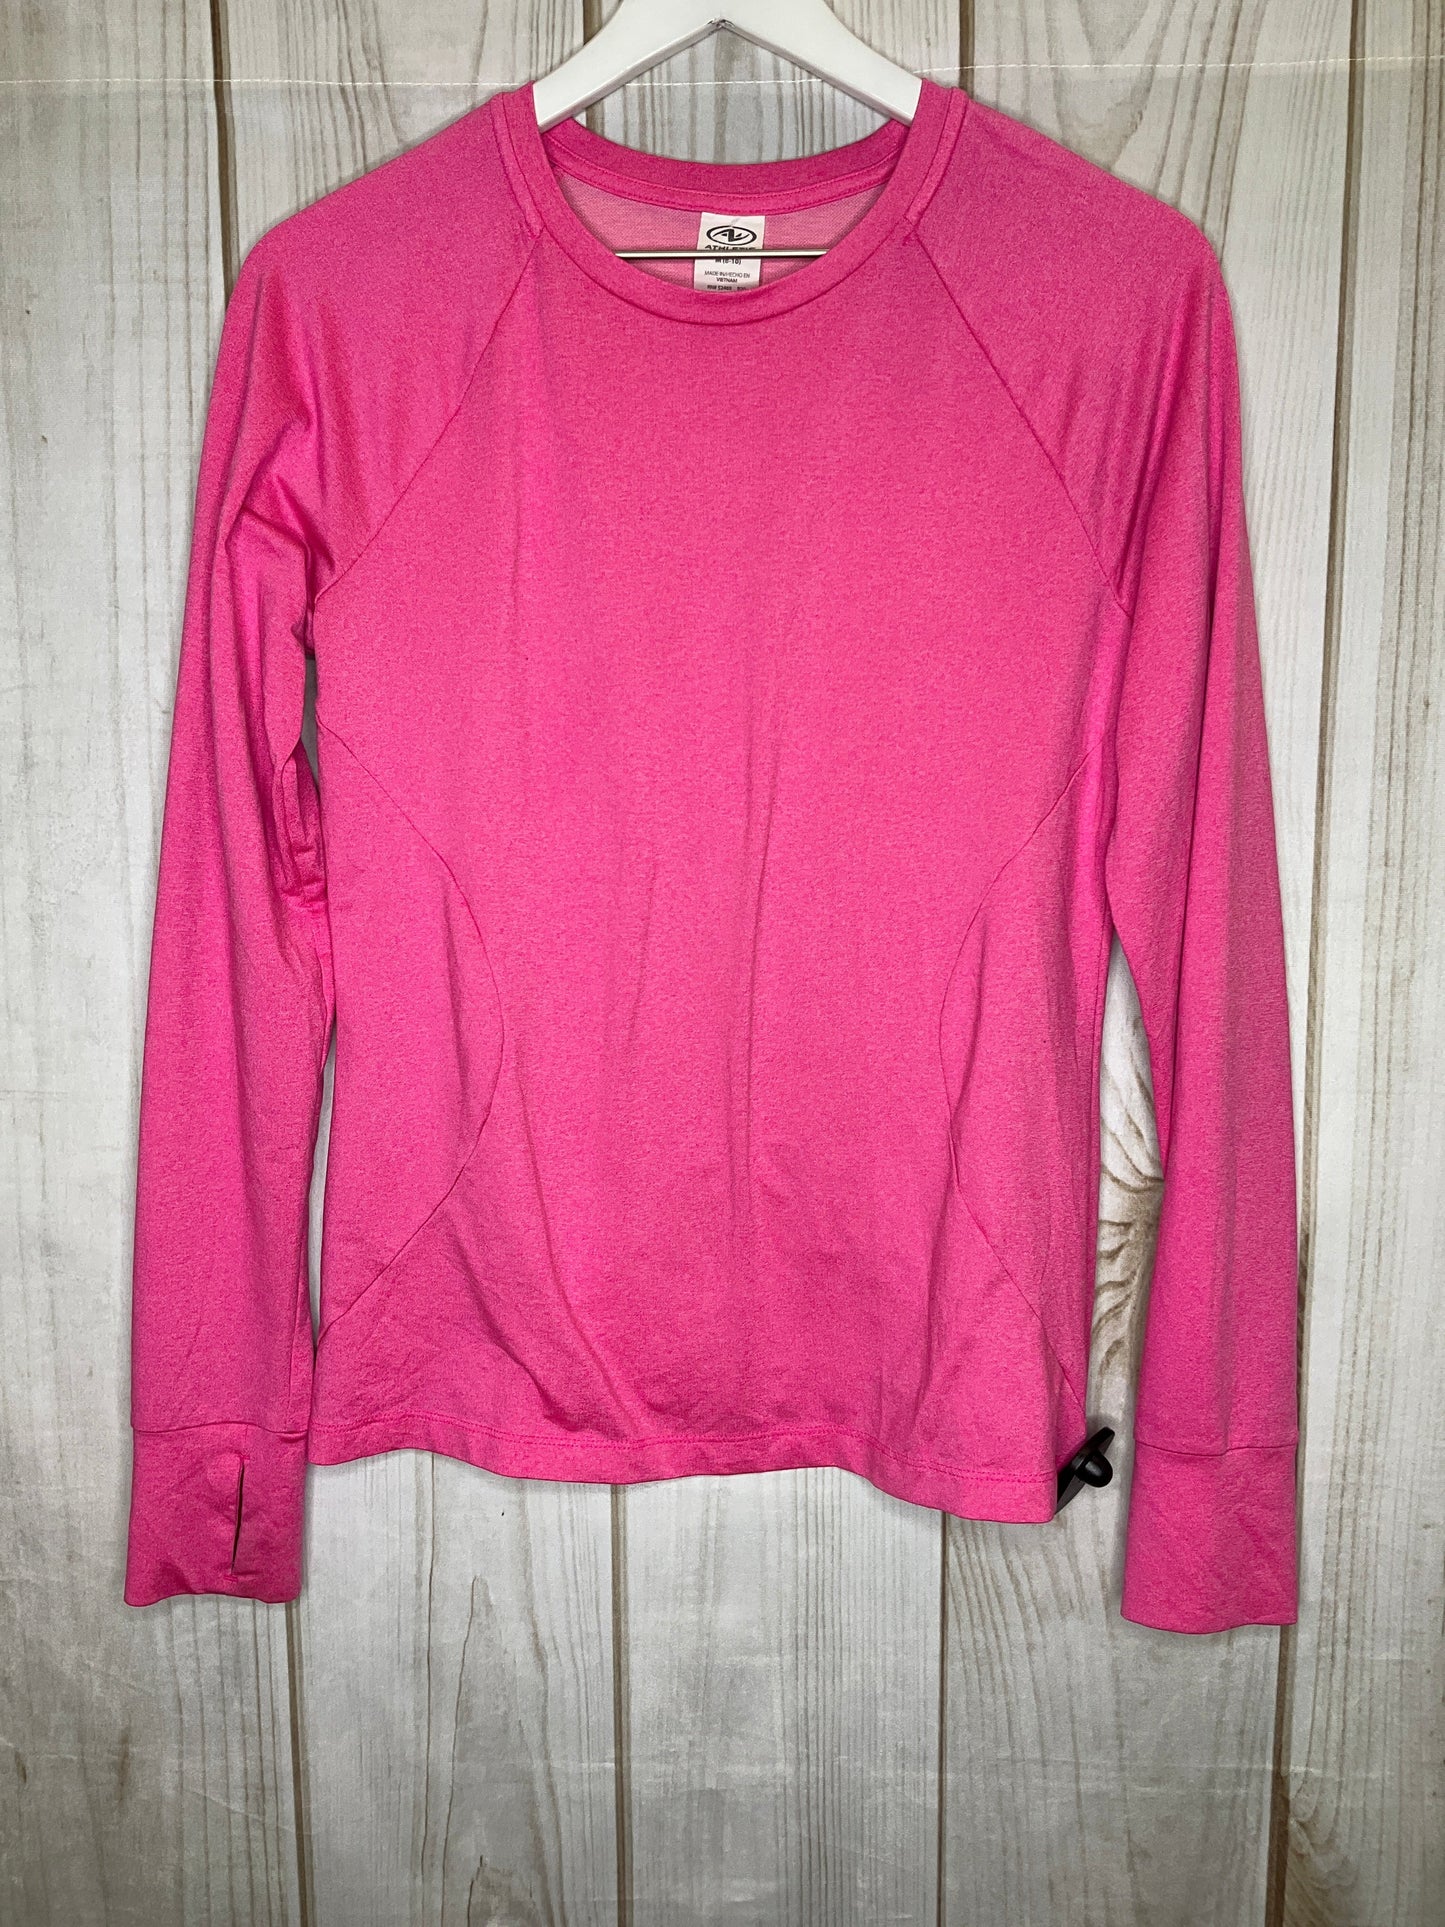 Athletic Top Long Sleeve Crewneck By Athletic Works  Size: M